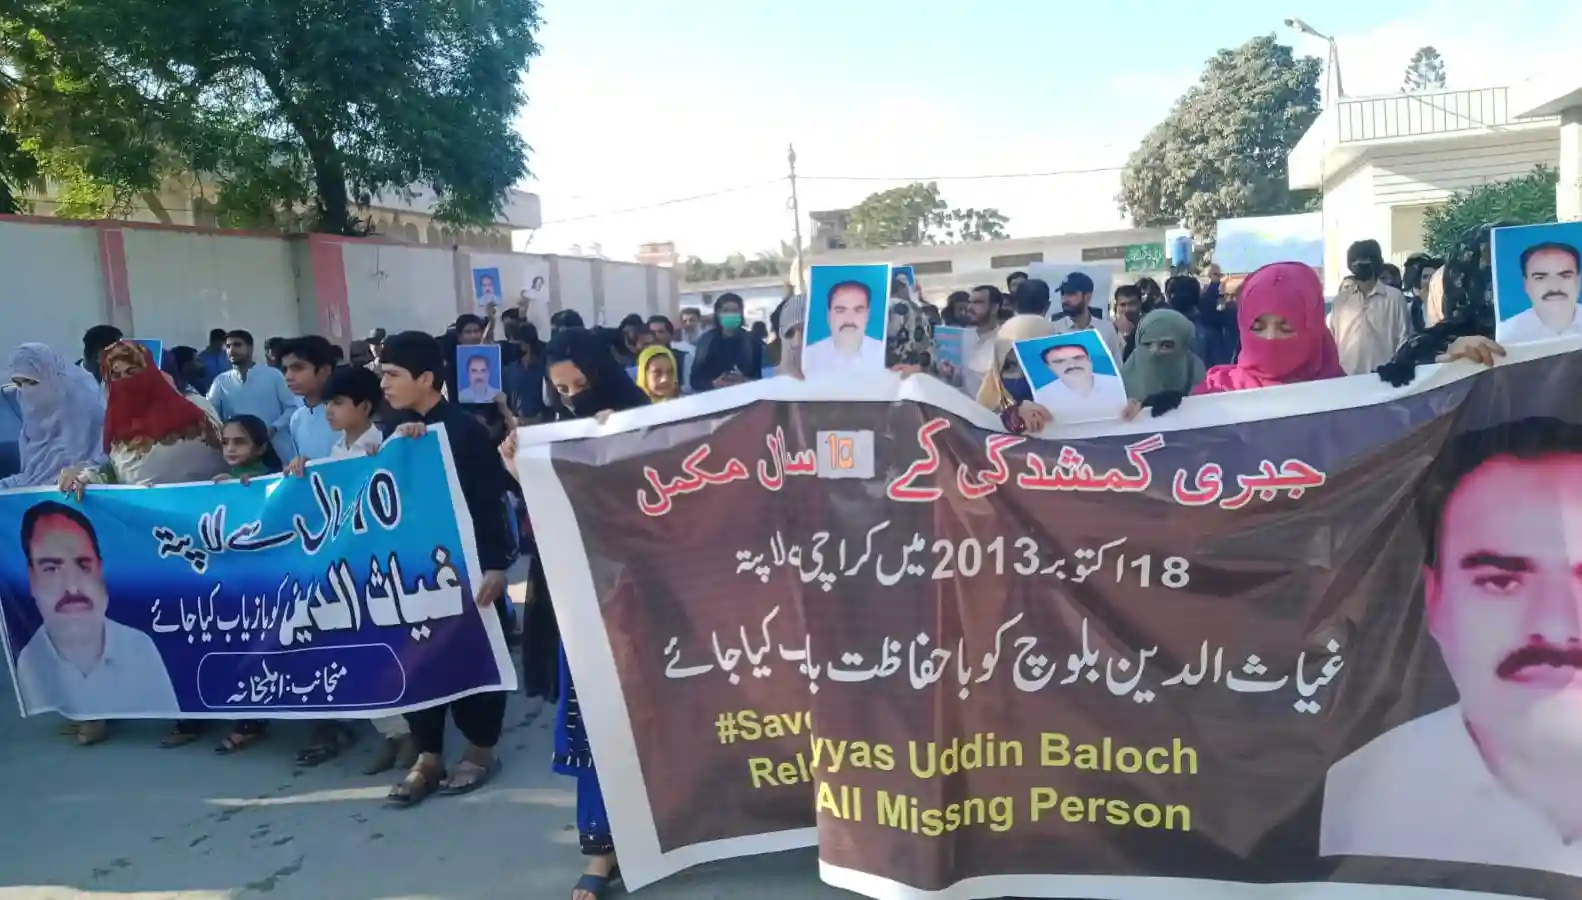 Watch: Is Karima Baloch’s martyrdom spurring women protests against Pakistan?